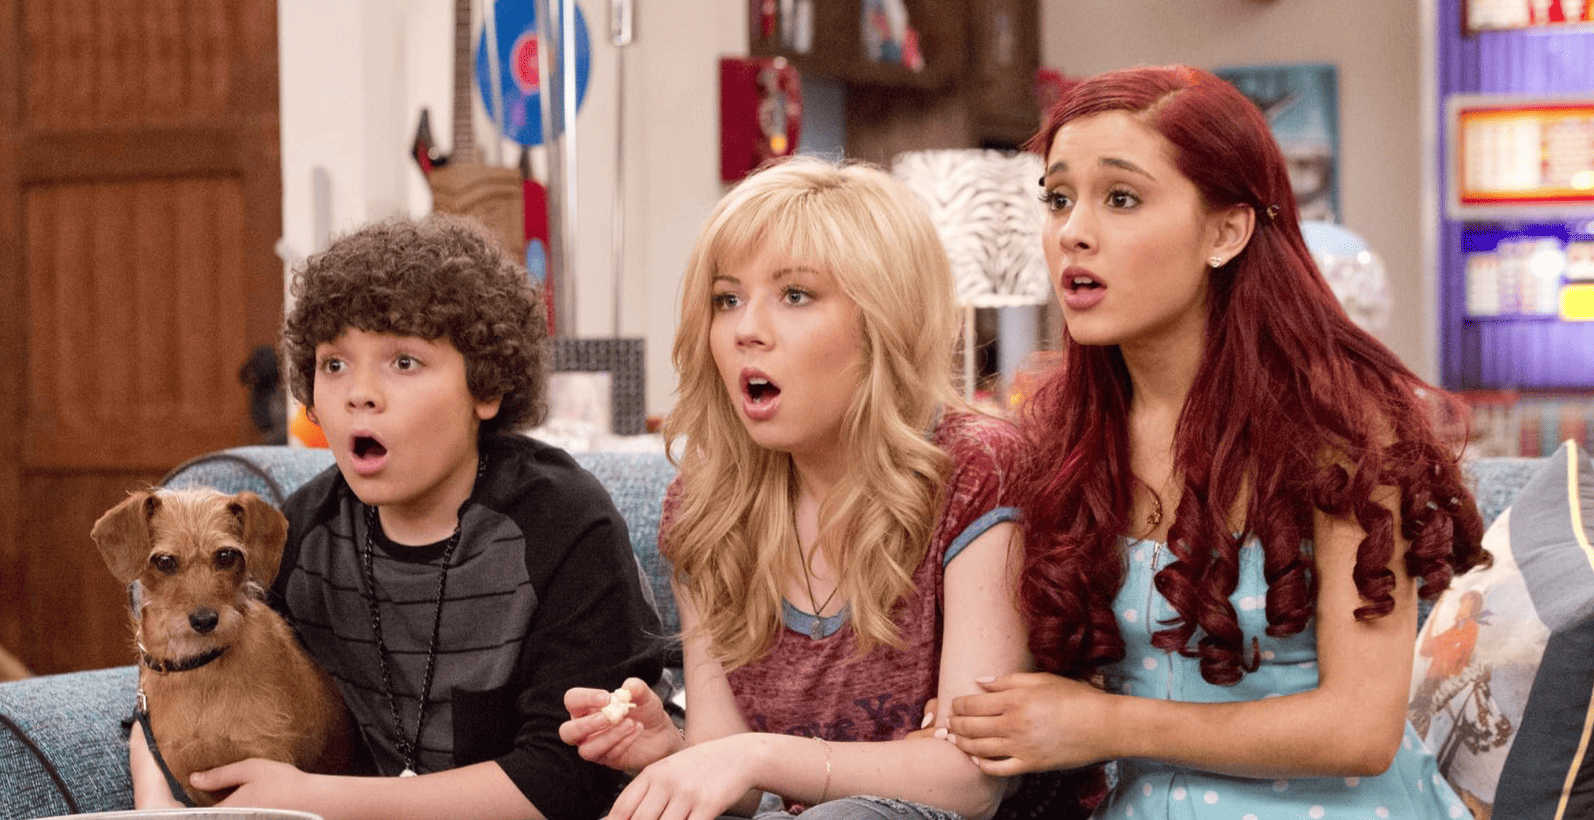 Cameron Ocasio, Jennette McCurdy, and Ariana Grande sitting on a couch and gasping at something off-camera in this image from Nickelodeon Productions